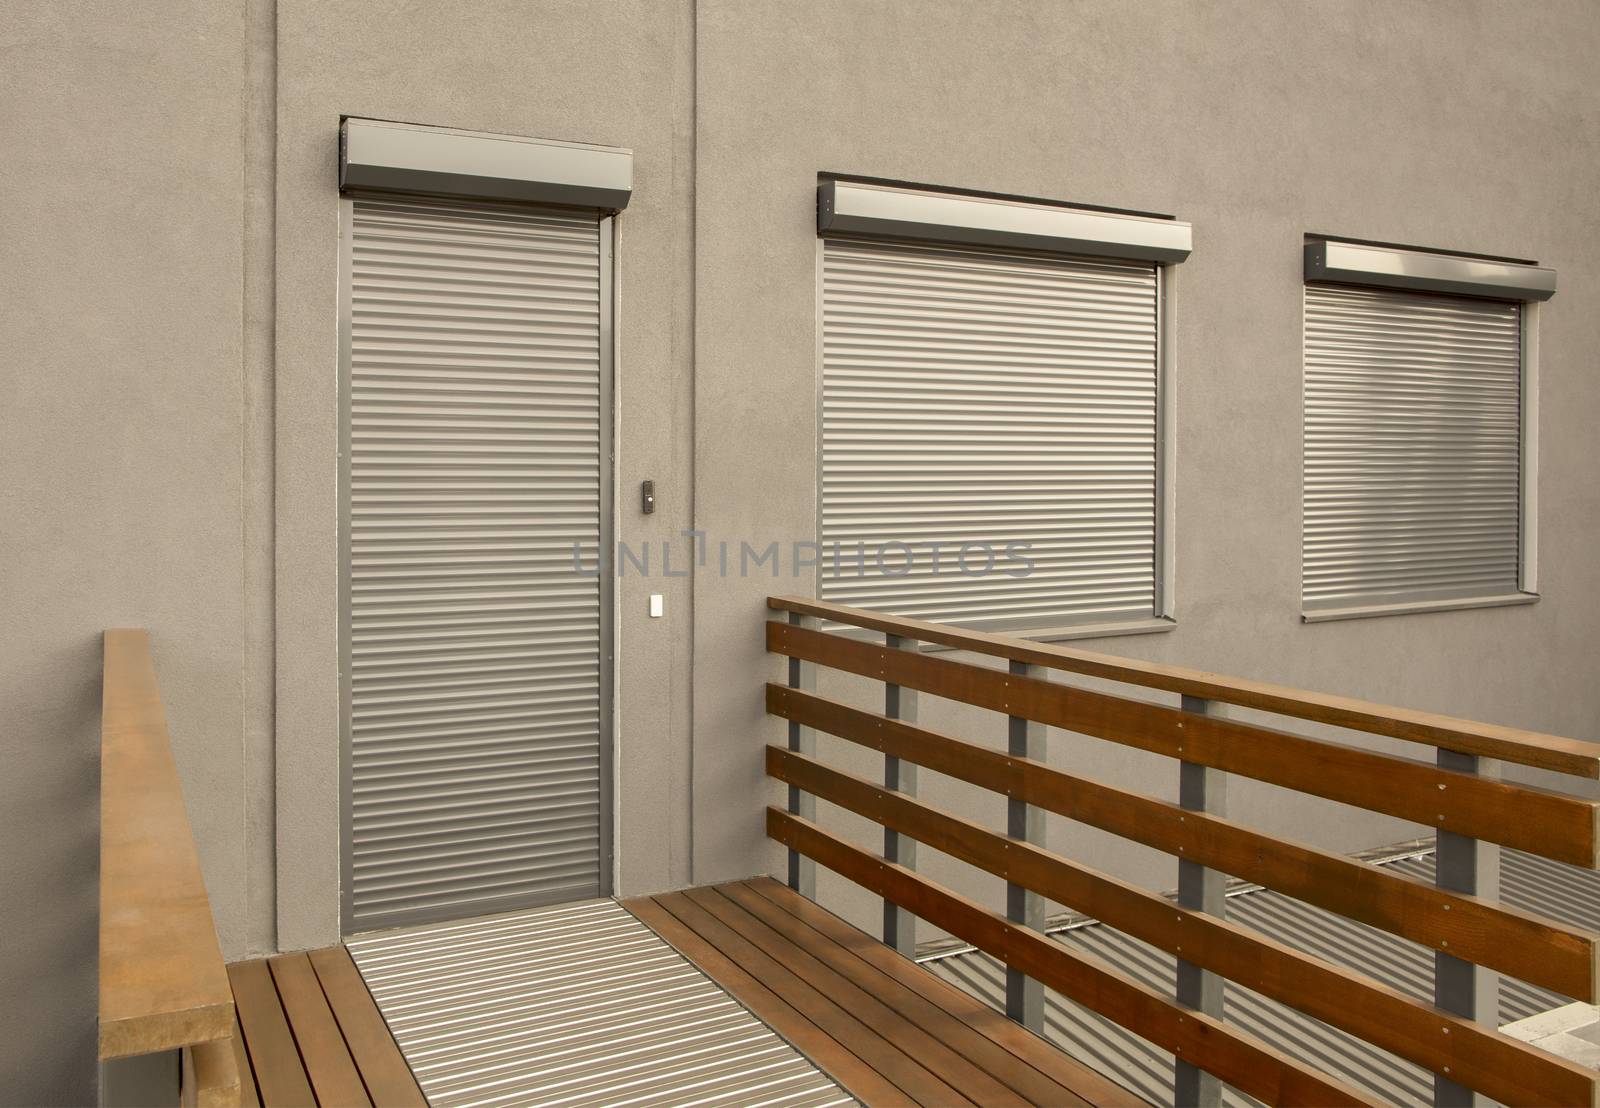 Light brown metal blinds on the doors and windows of the house